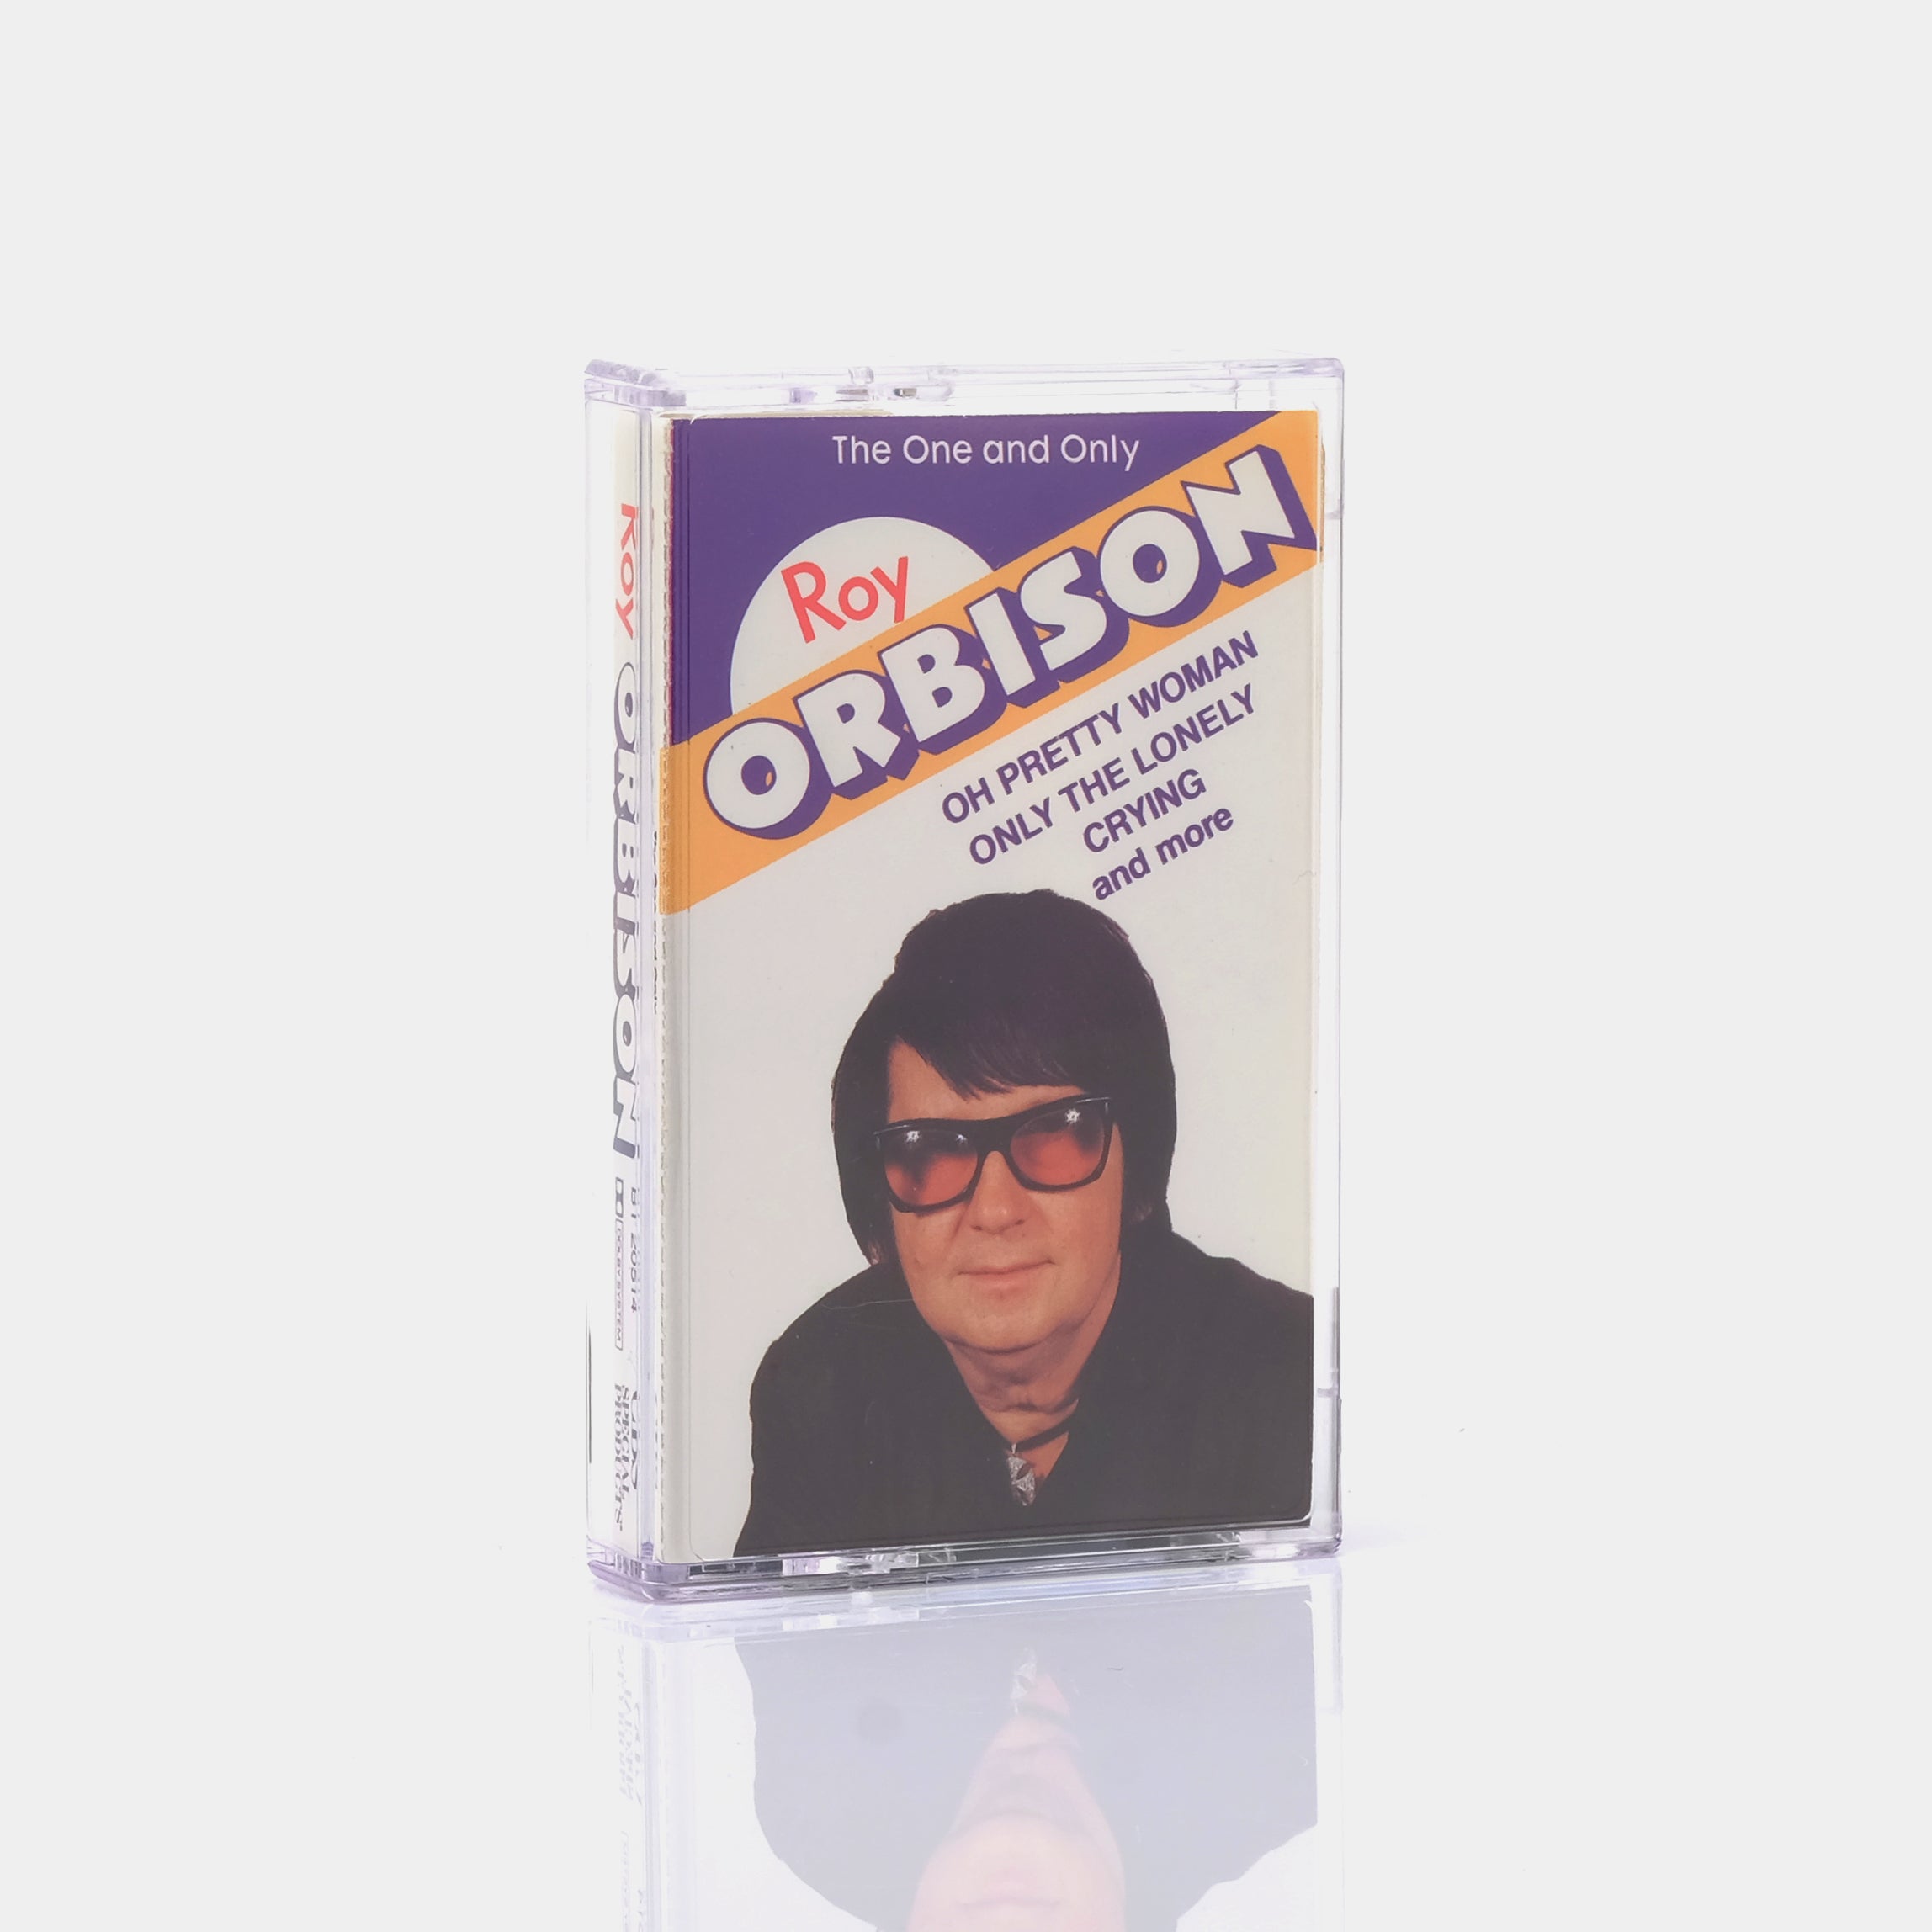 Roy Oribson - The One And Only Cassette Tape